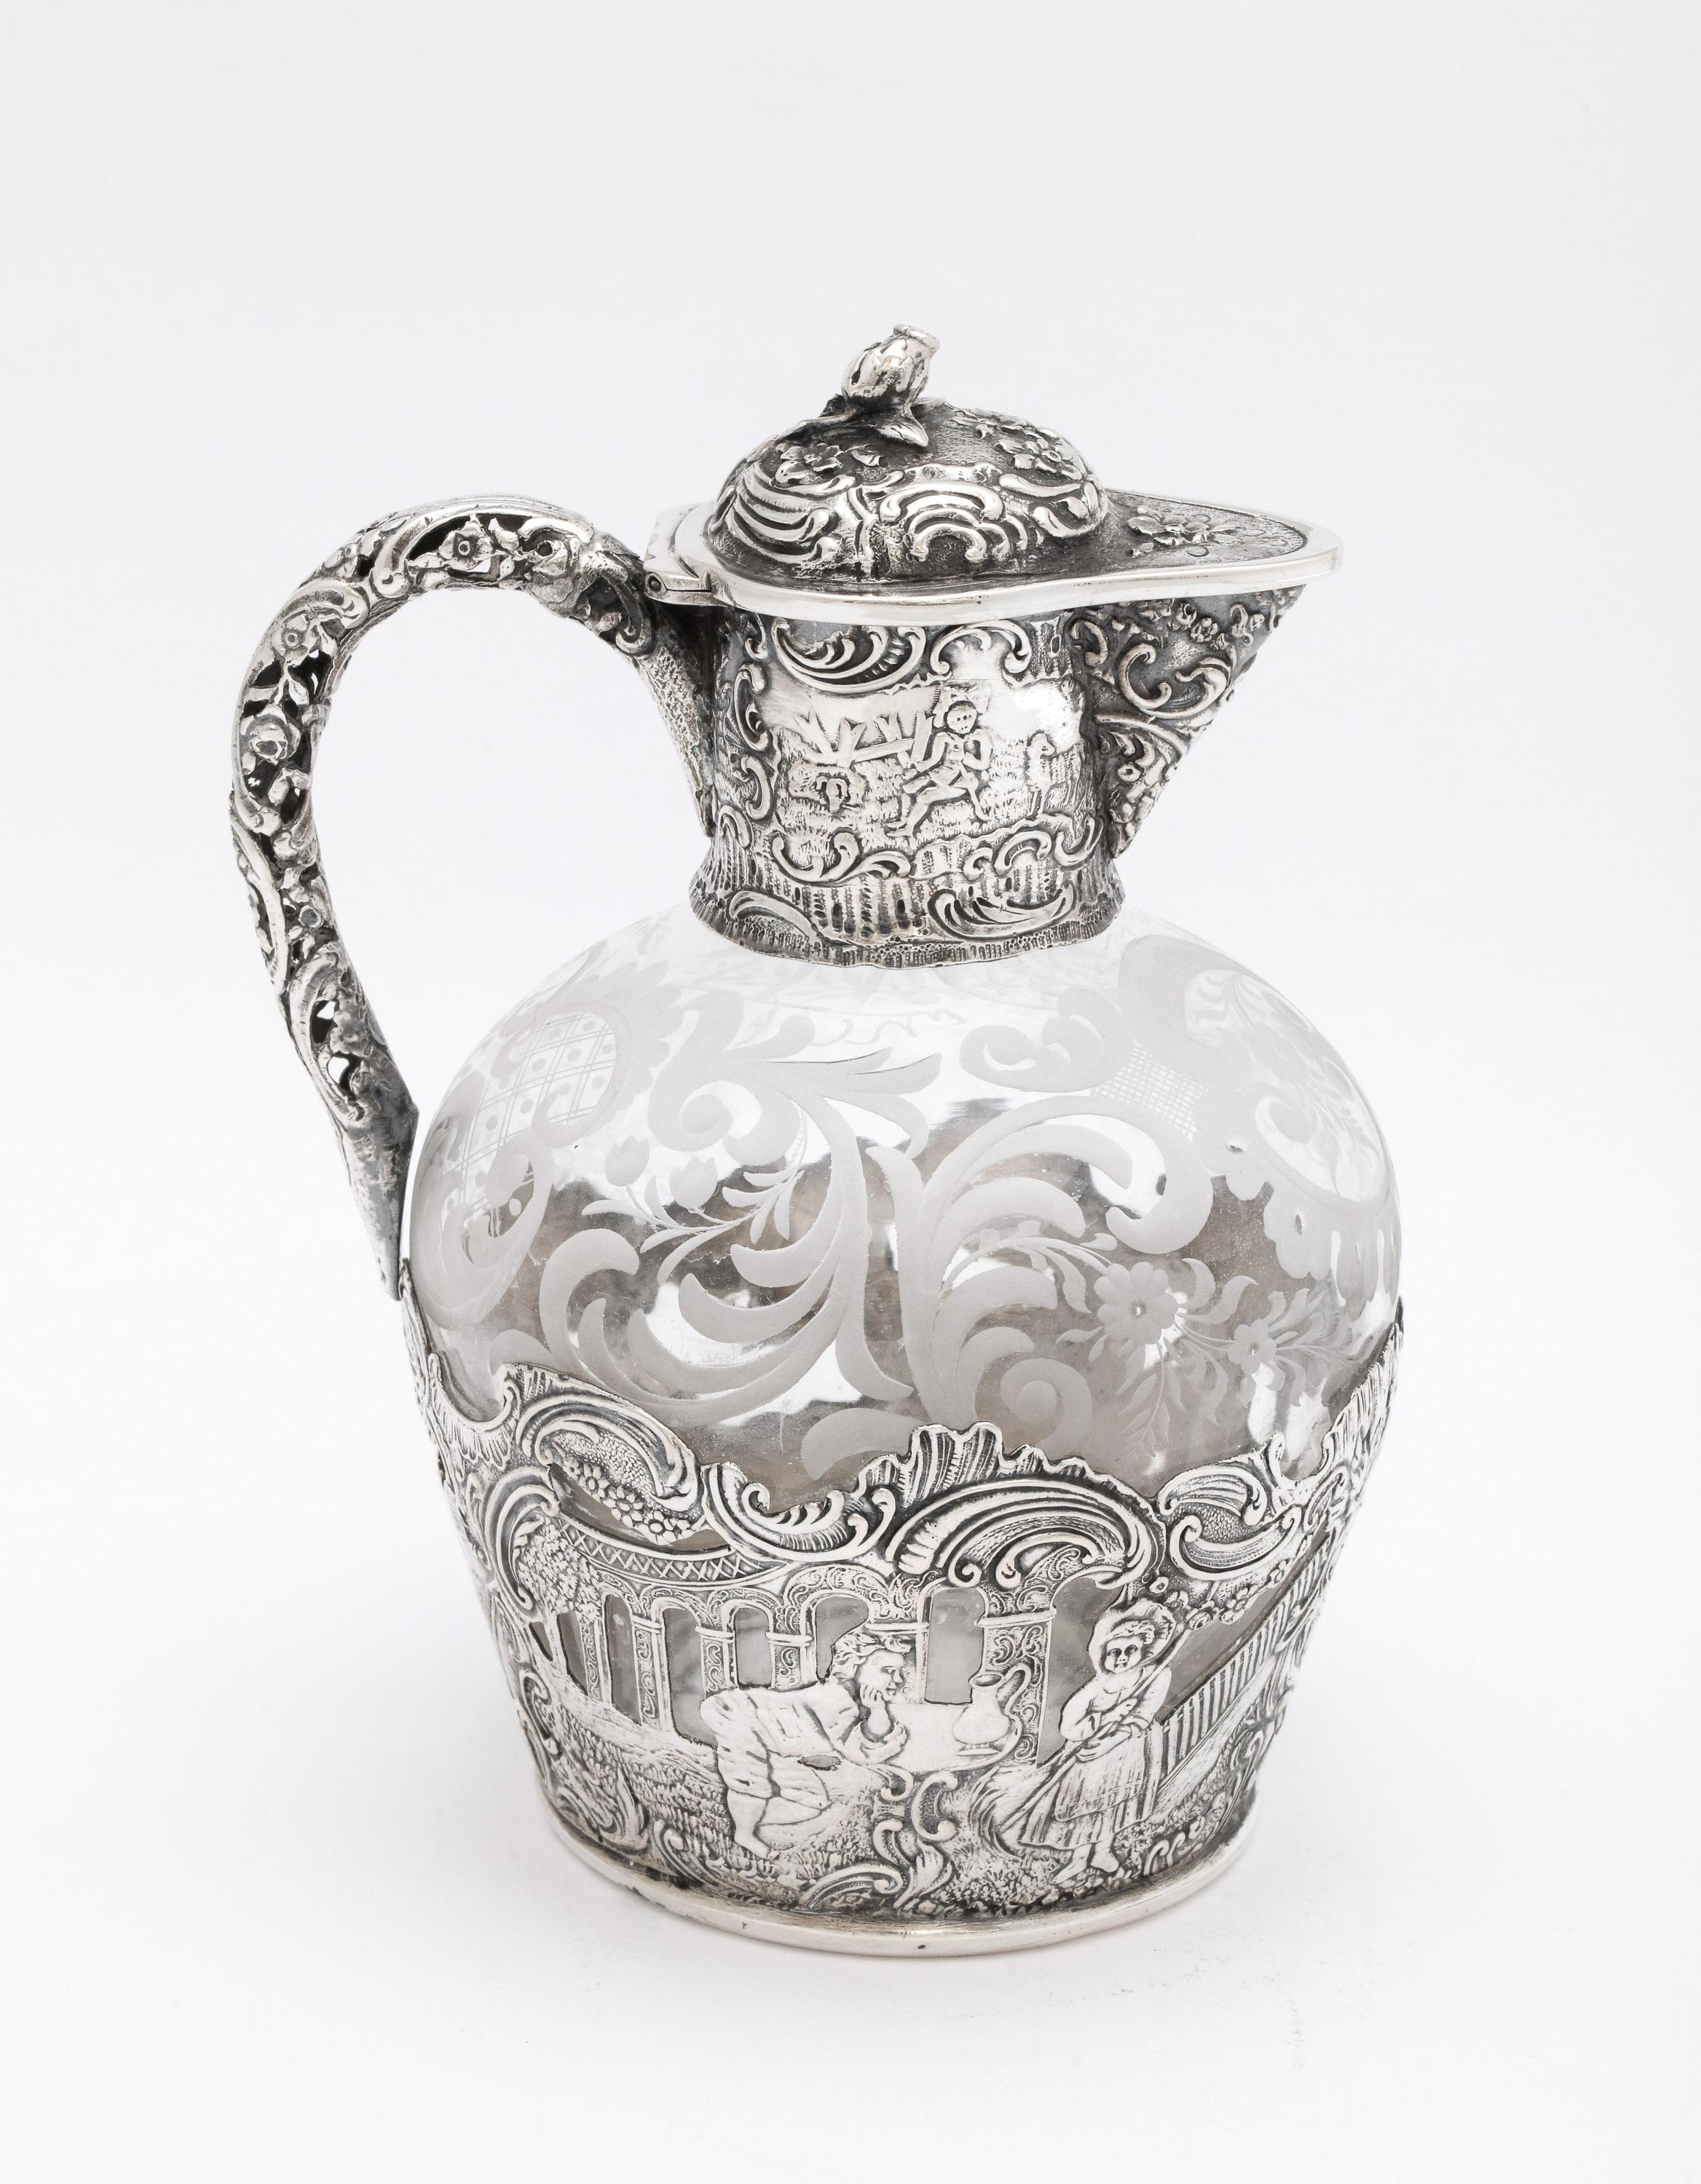 Victorian Period, Continental Silver (.800)-mounted, etched glass liqueur decanter with hinged lid, Hanau, Germany, Ca. 1900. Glass is etched with swirls and flowers; the silver is decorated with country scenes. The handle is pierced. Measures 6